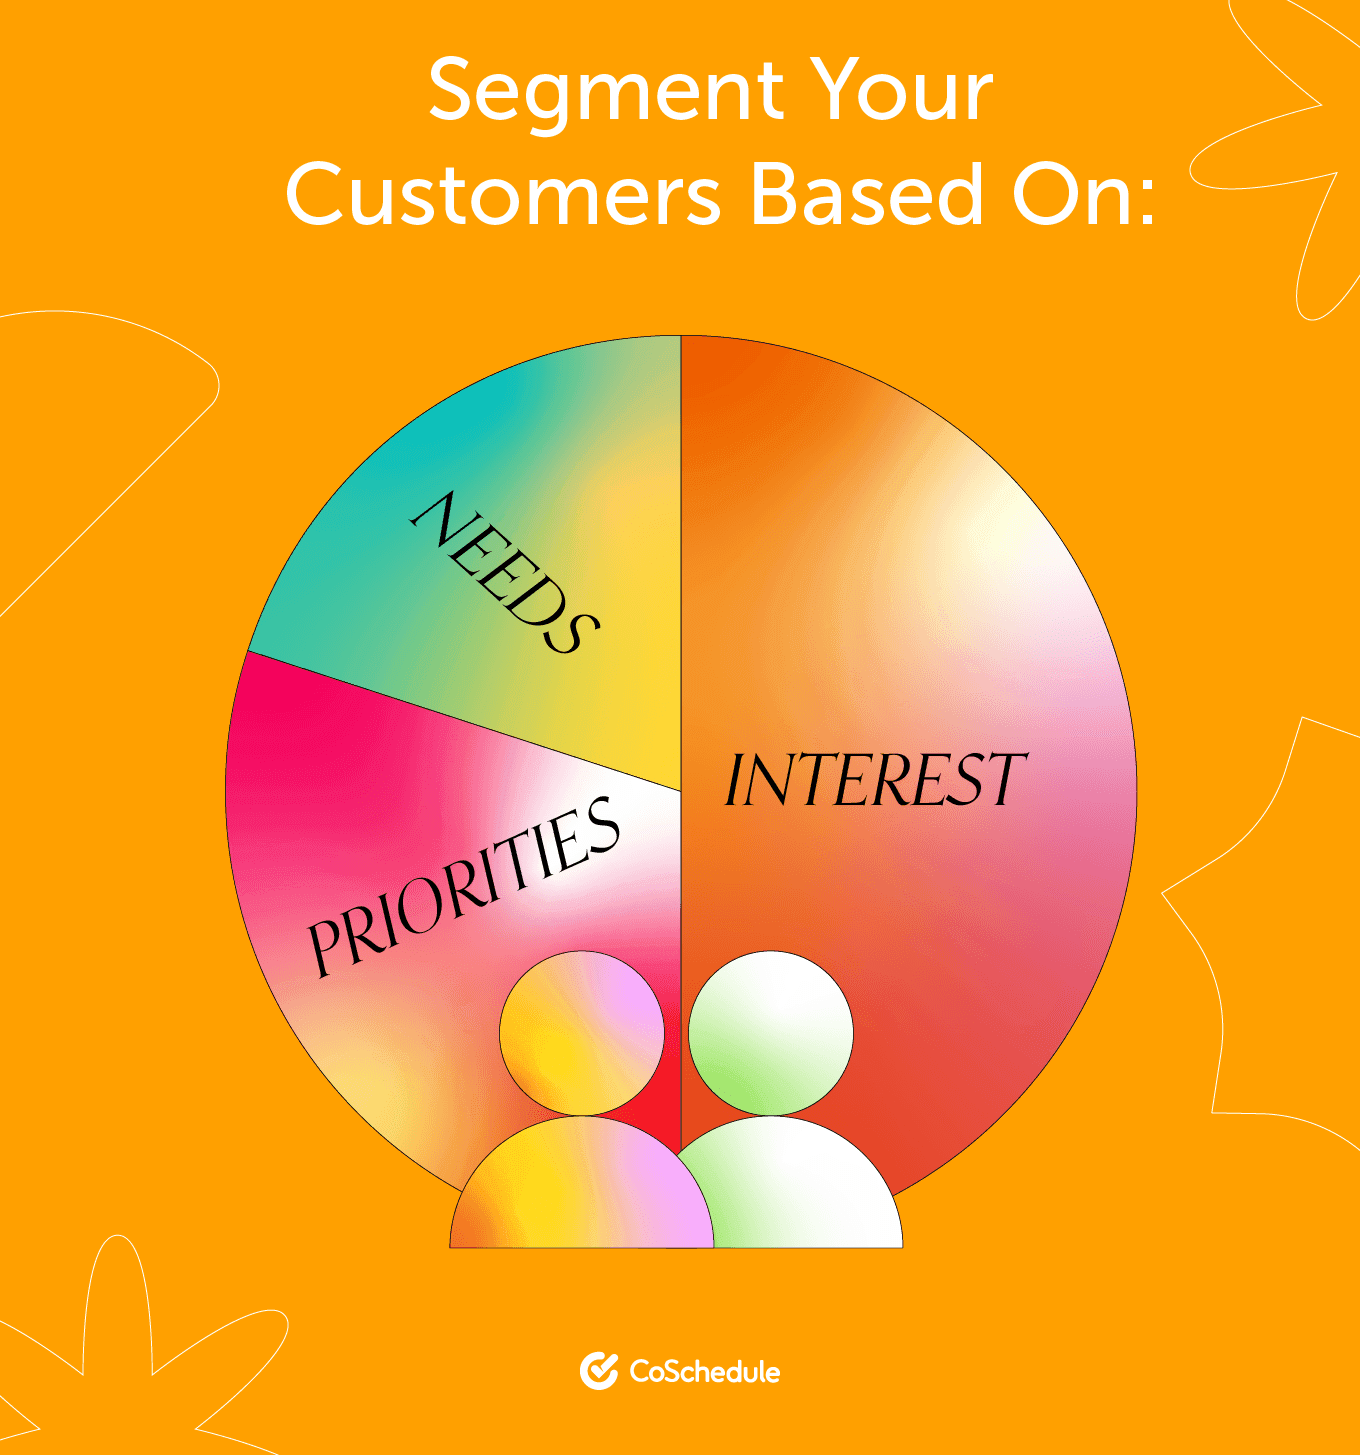 CoSchedule graphic on how to segment customers based on certain categories